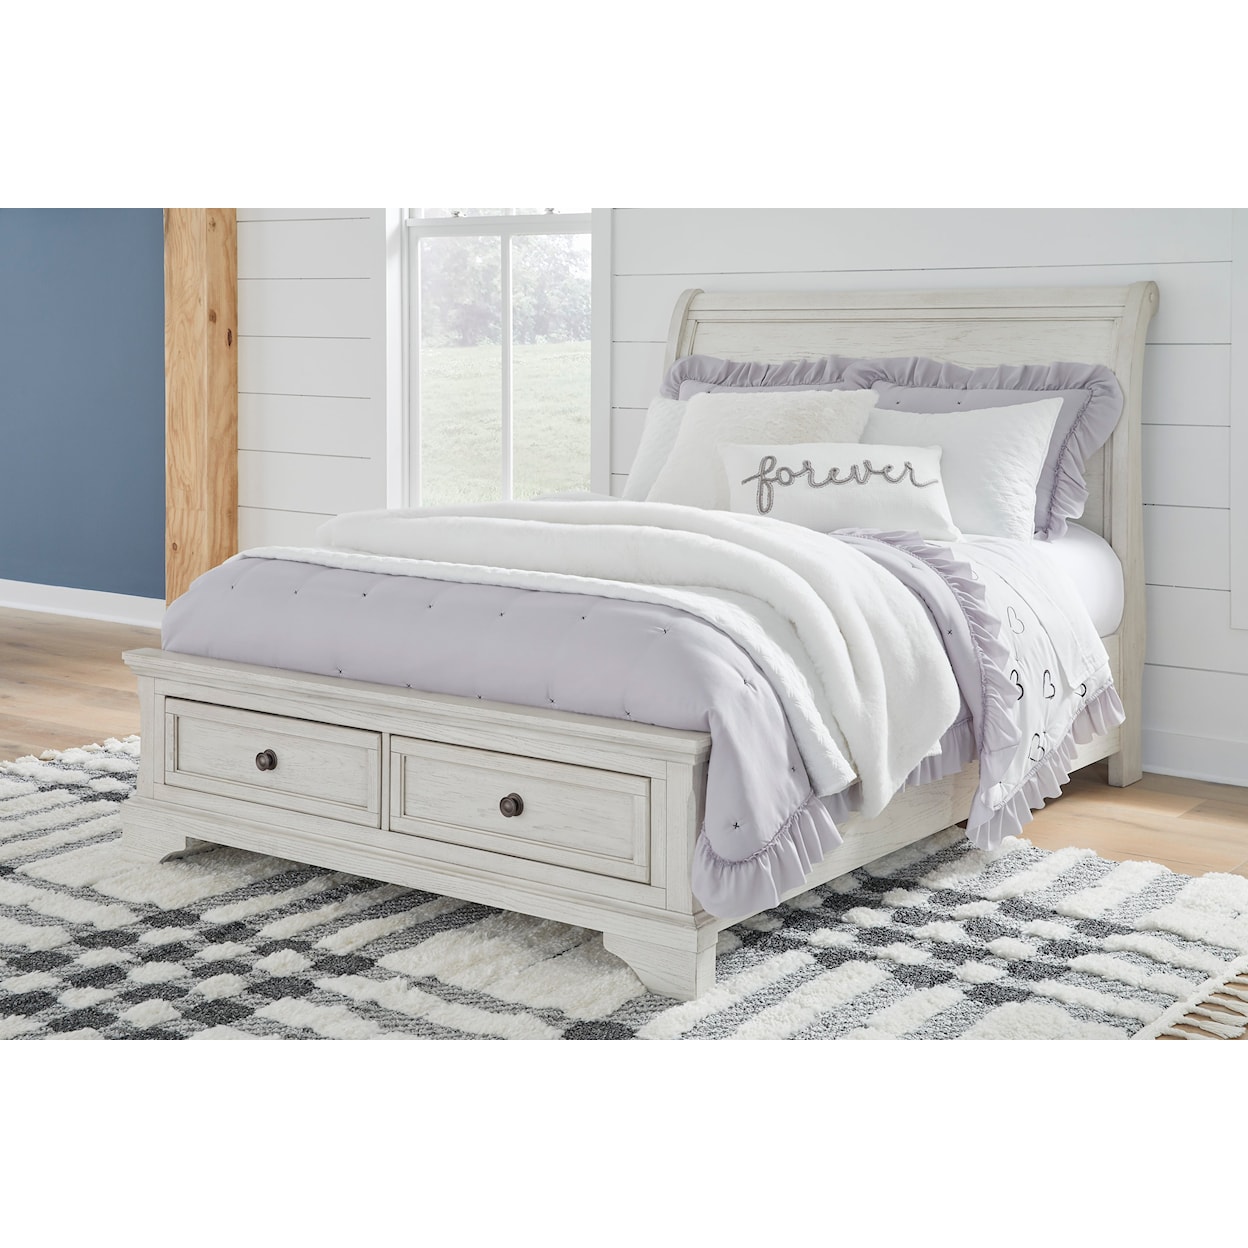 Signature Robbinsdale Full Sleigh Bed with Storage